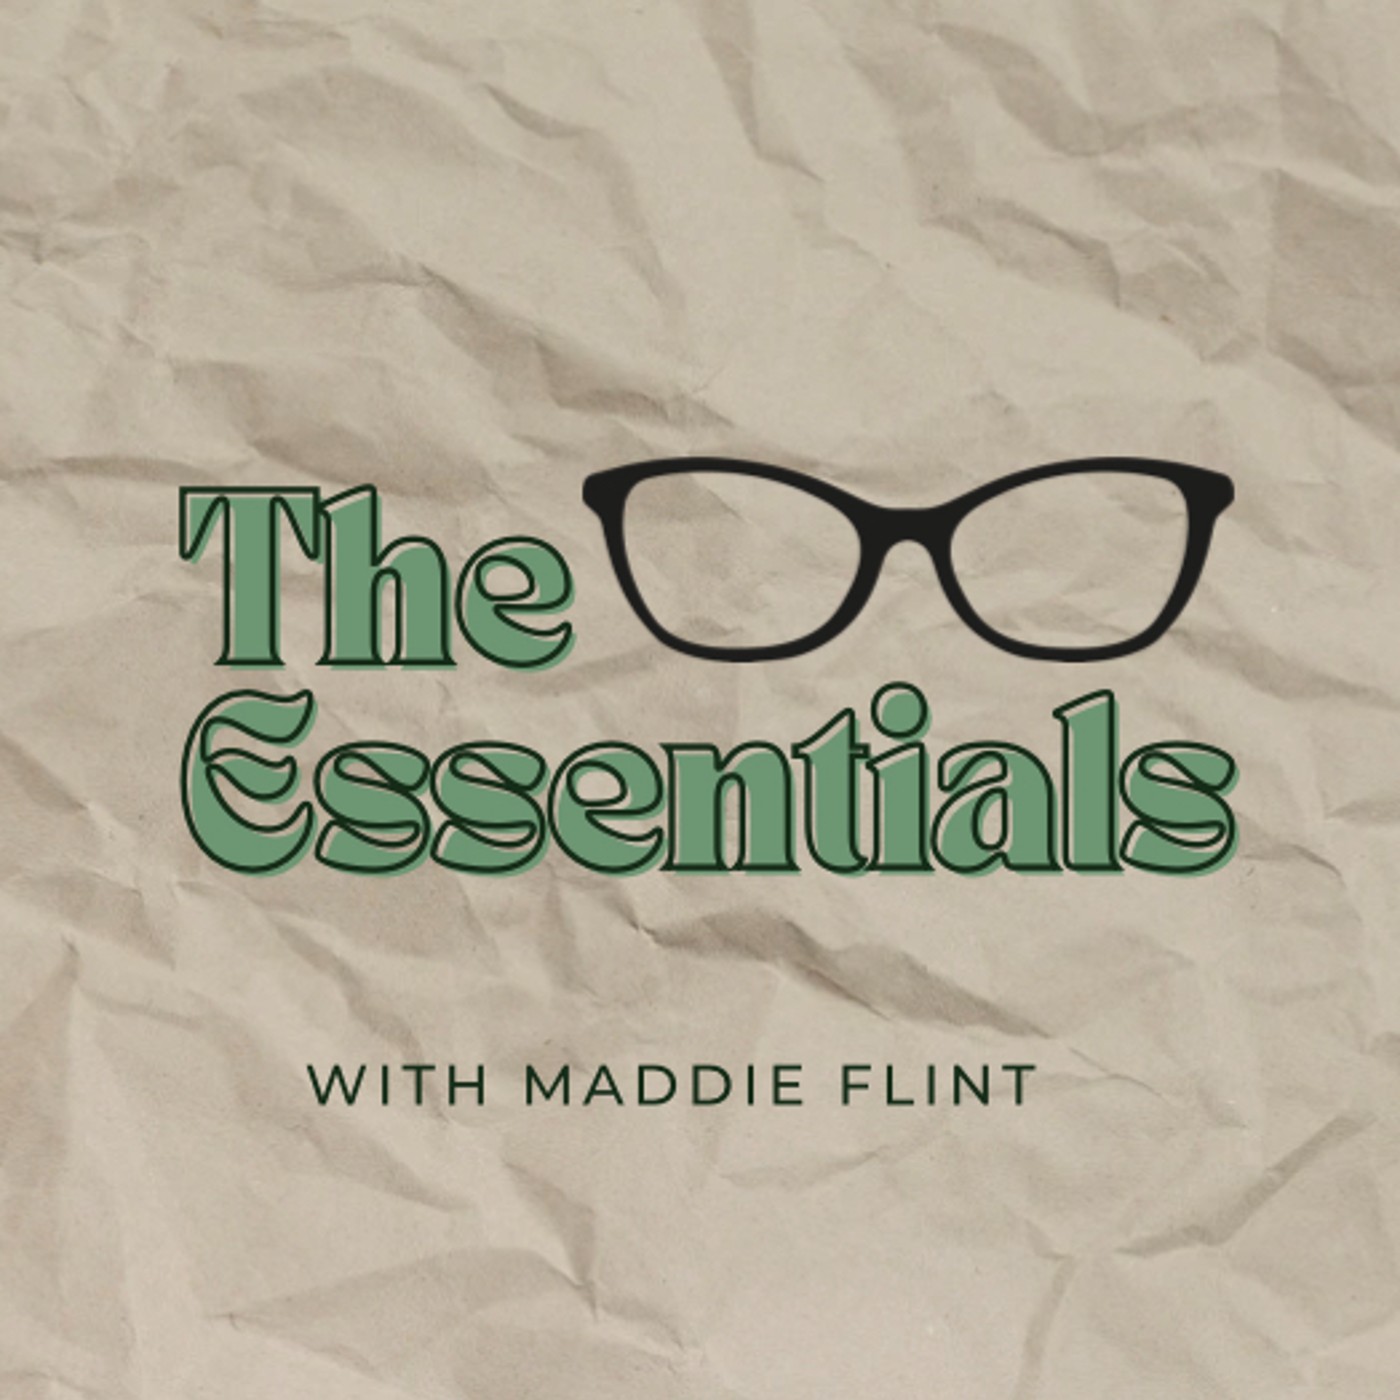 Artwork for The Essentials with Maddie Flint